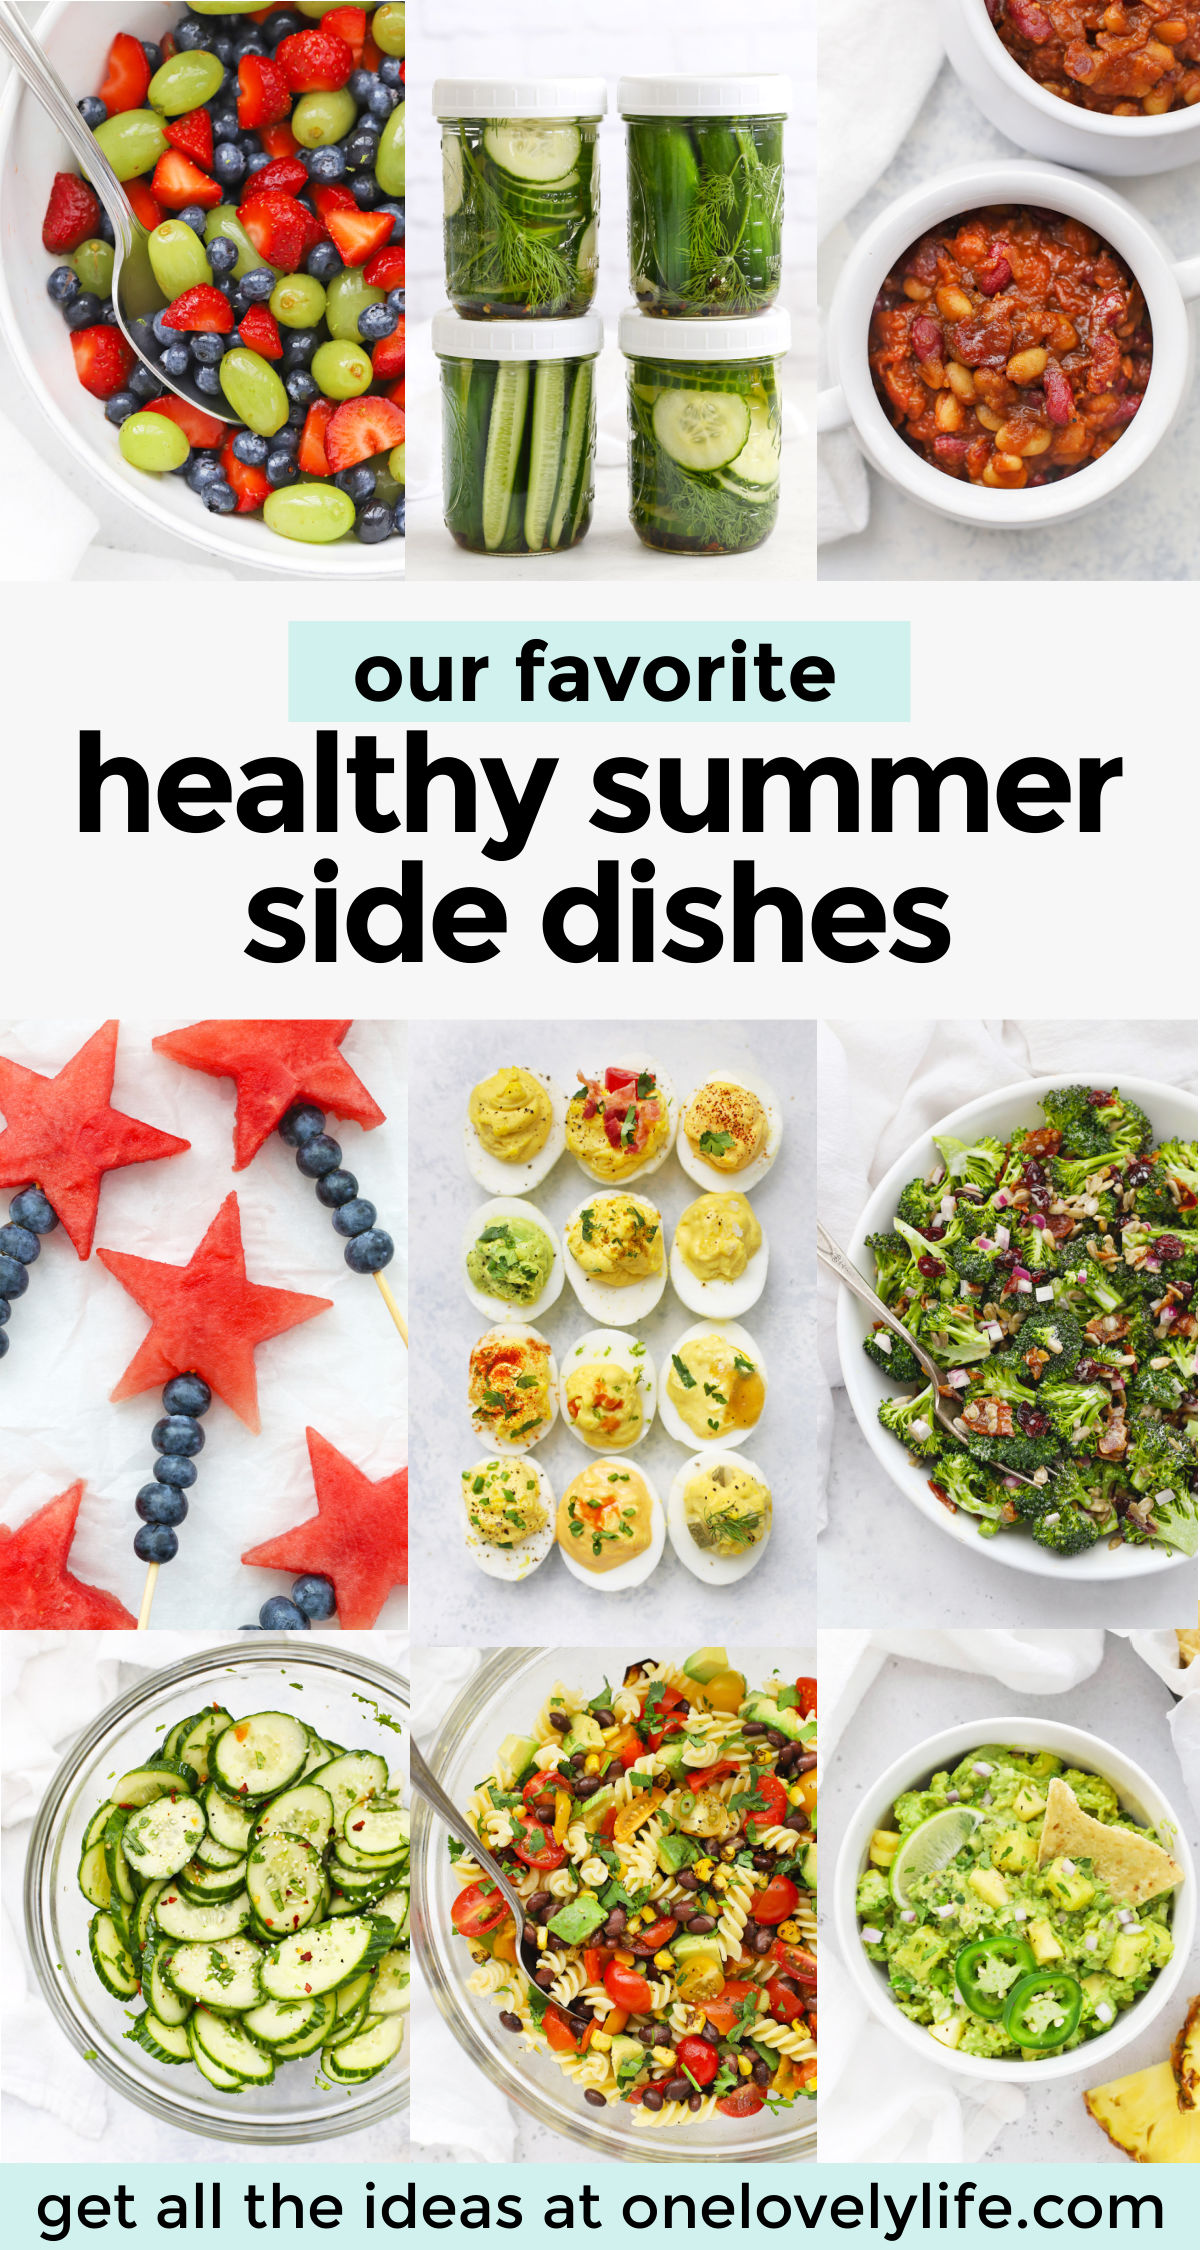 Our Favorite Healthy Summer Side Dishes--summer salads & sides that are perfect for your next barbecue or cookout! (Gluten-Free, Vegan, Paleo) // Summer Side Dish // BBQ Side Dishes // Barbecue Side Dishes // Grilling Side Dishes // Potluck Salads // Potluck Side Dish